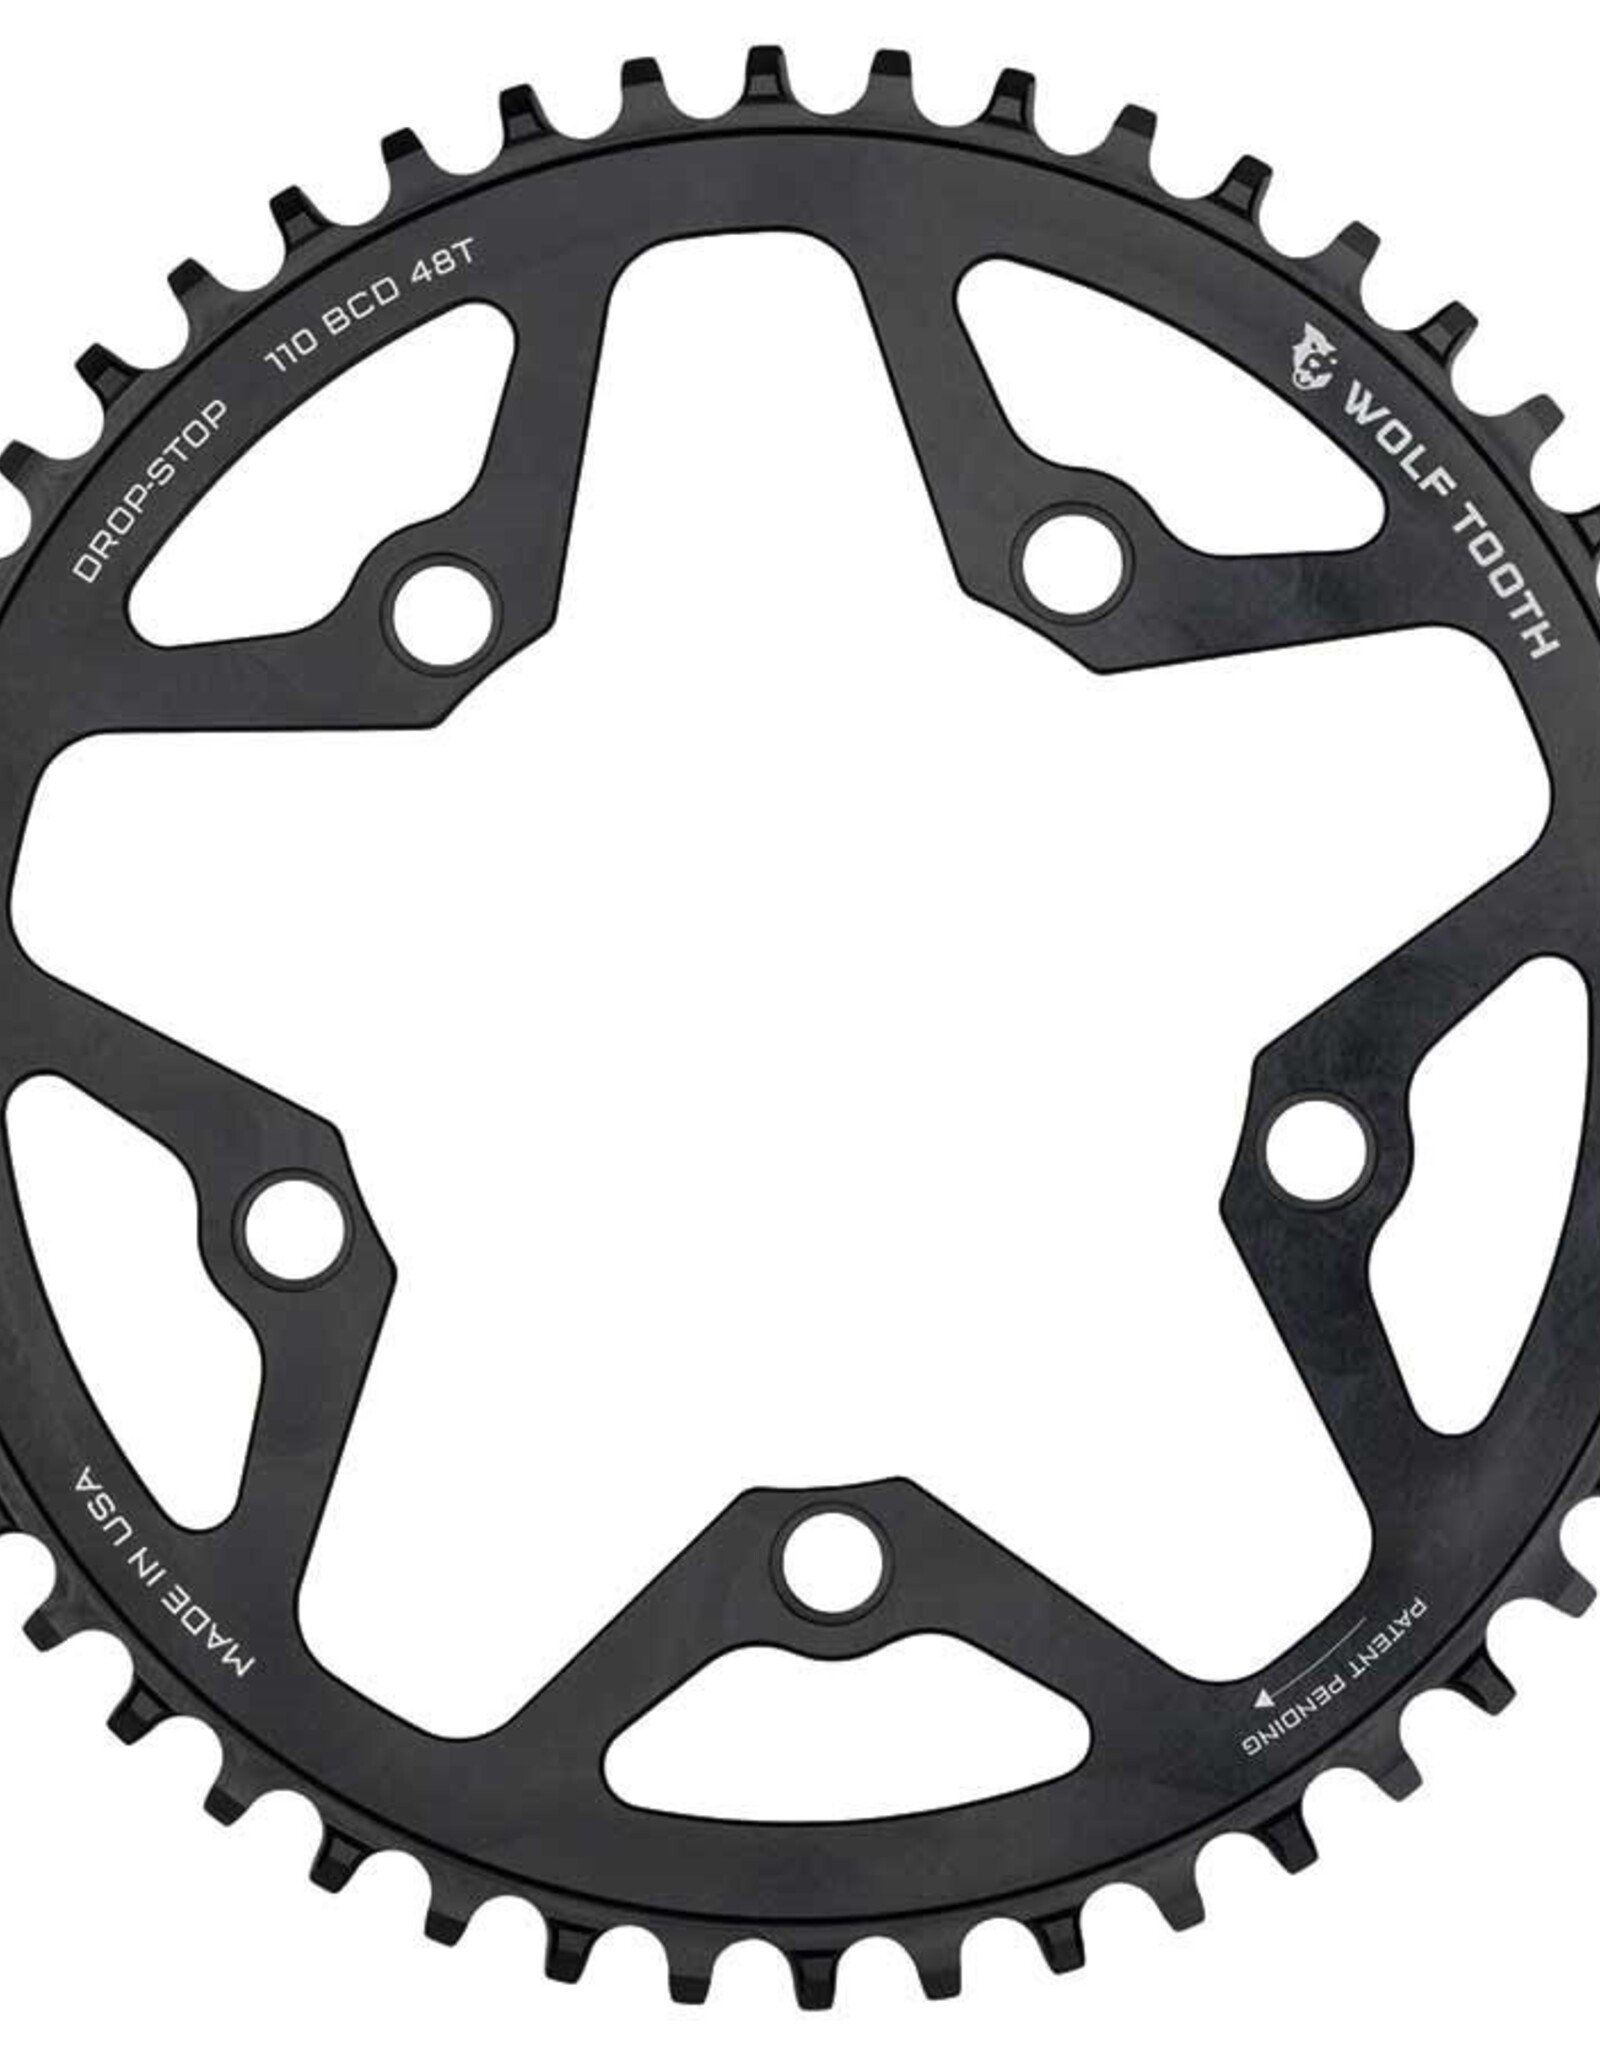 Wolf Tooth Components, BCD 110mm 5 Bolts, Chainring, Teeth: 46, Speed: 10-12, BCD: 110, Bolts: 5, 7075-T6 Aluminum, Black